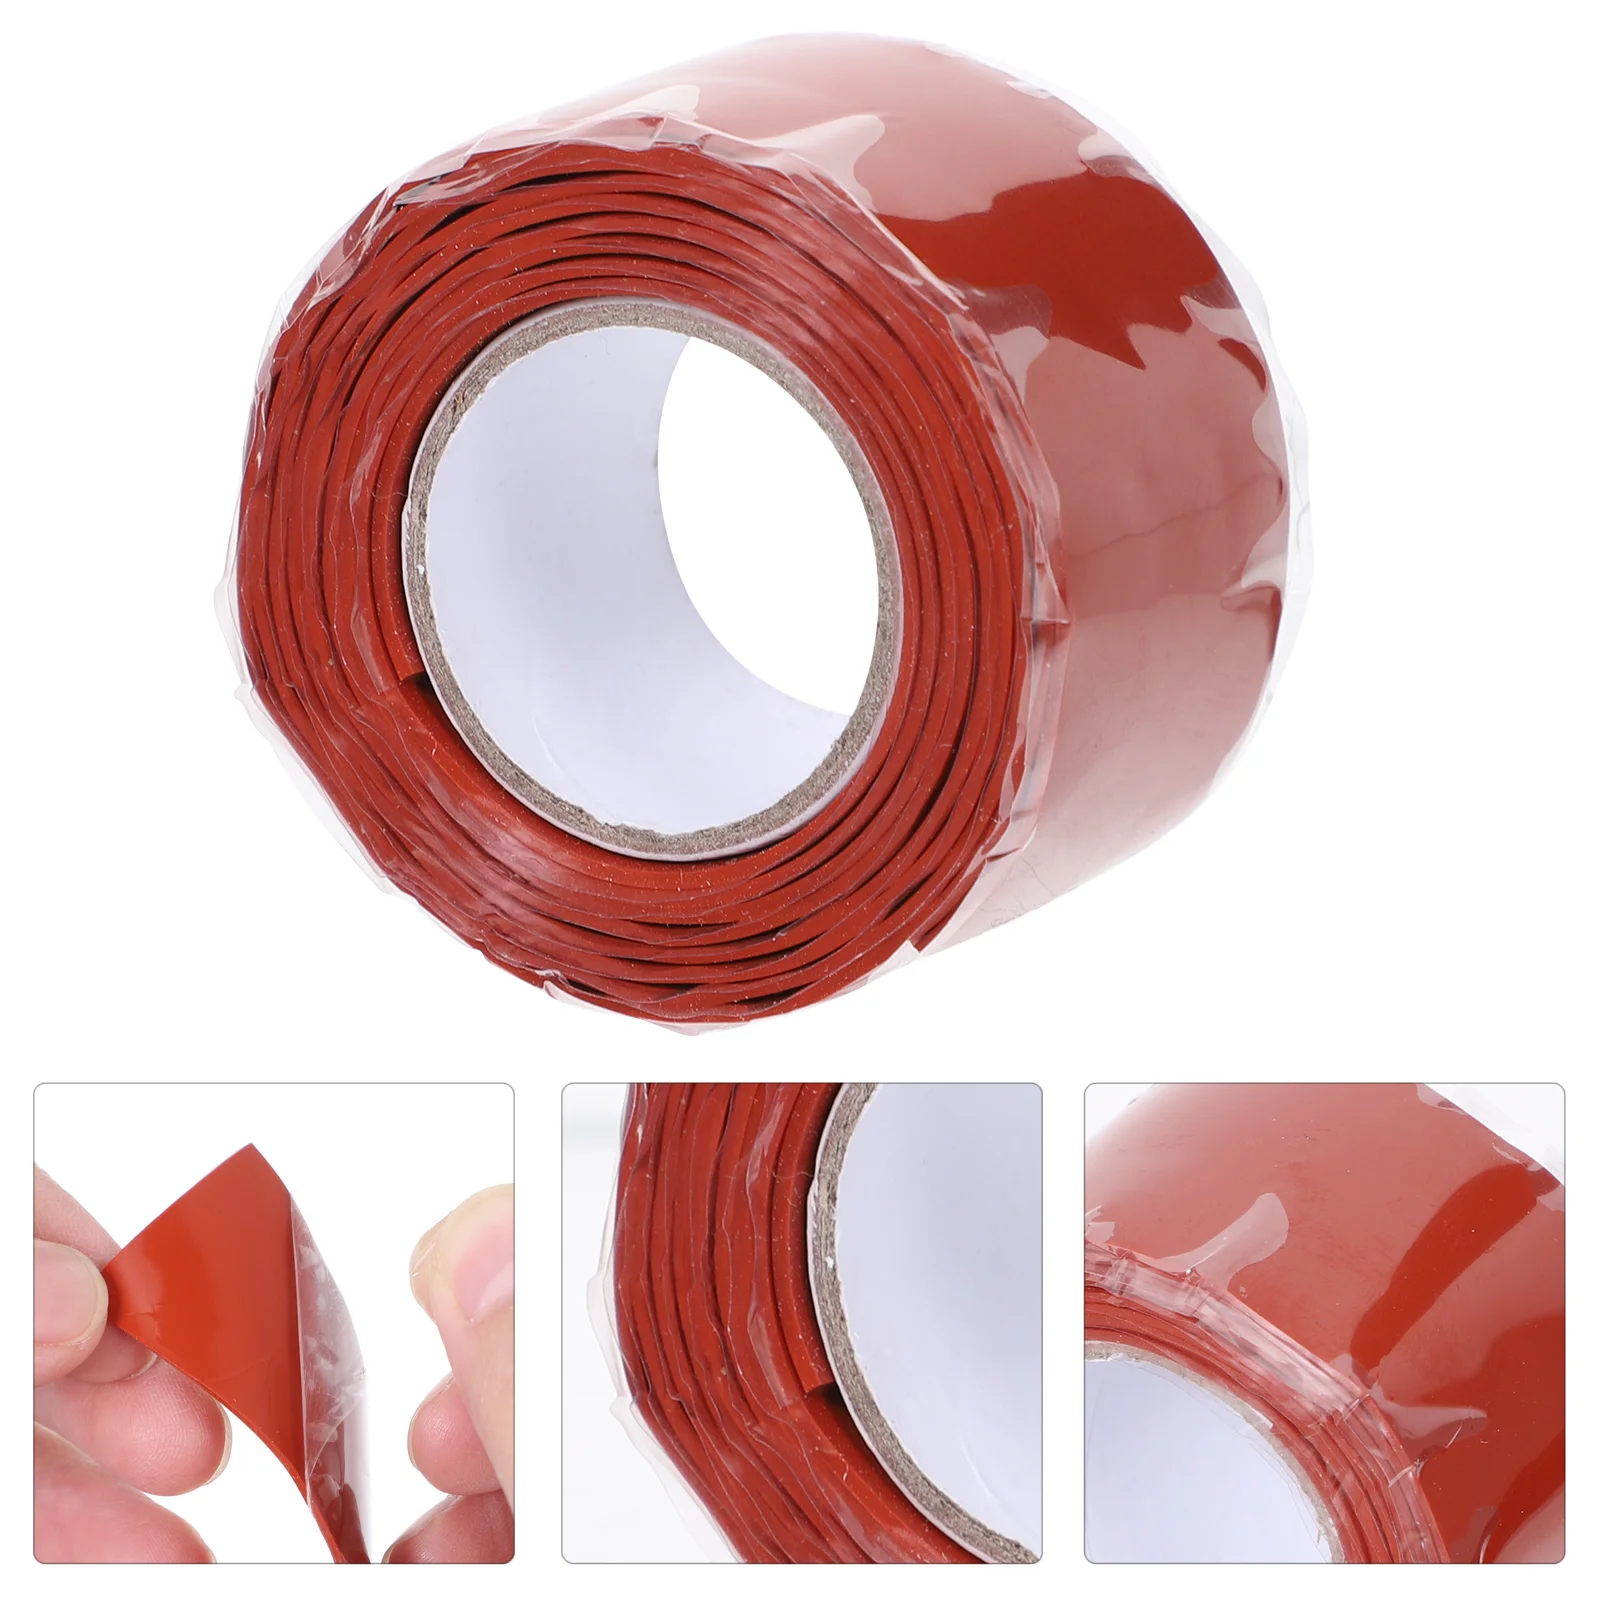 

Waterproof Repair Tape Outdoor Sealant Duct Use Pipe Sealing Seam Patch Plumbers Leaky Pipes